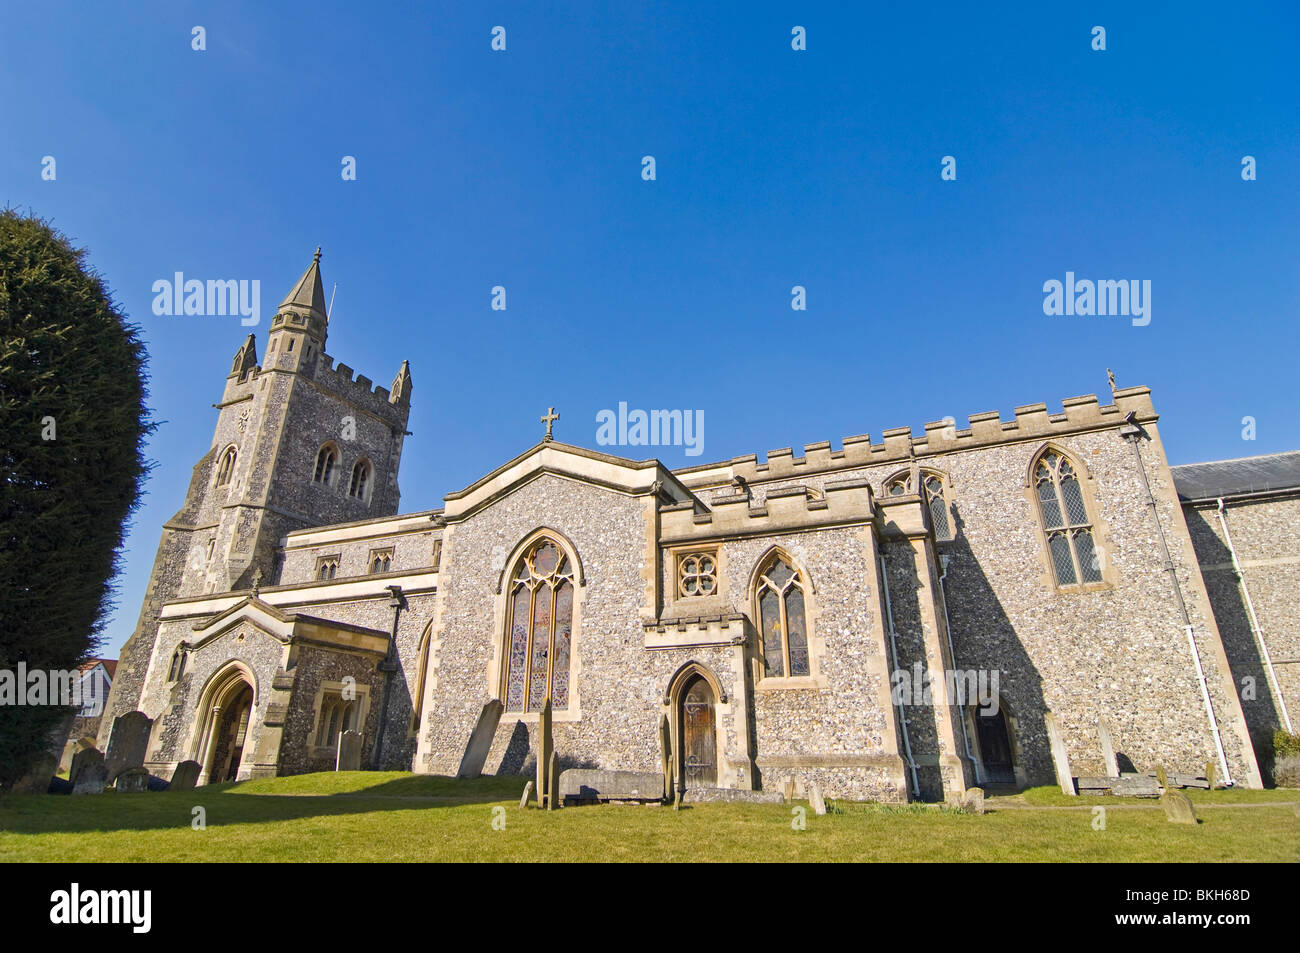 Horizontal wide angle of St Mary's Parish church in Old Amersham, Buckinghamshire on a bright sunny day. Stock Photo